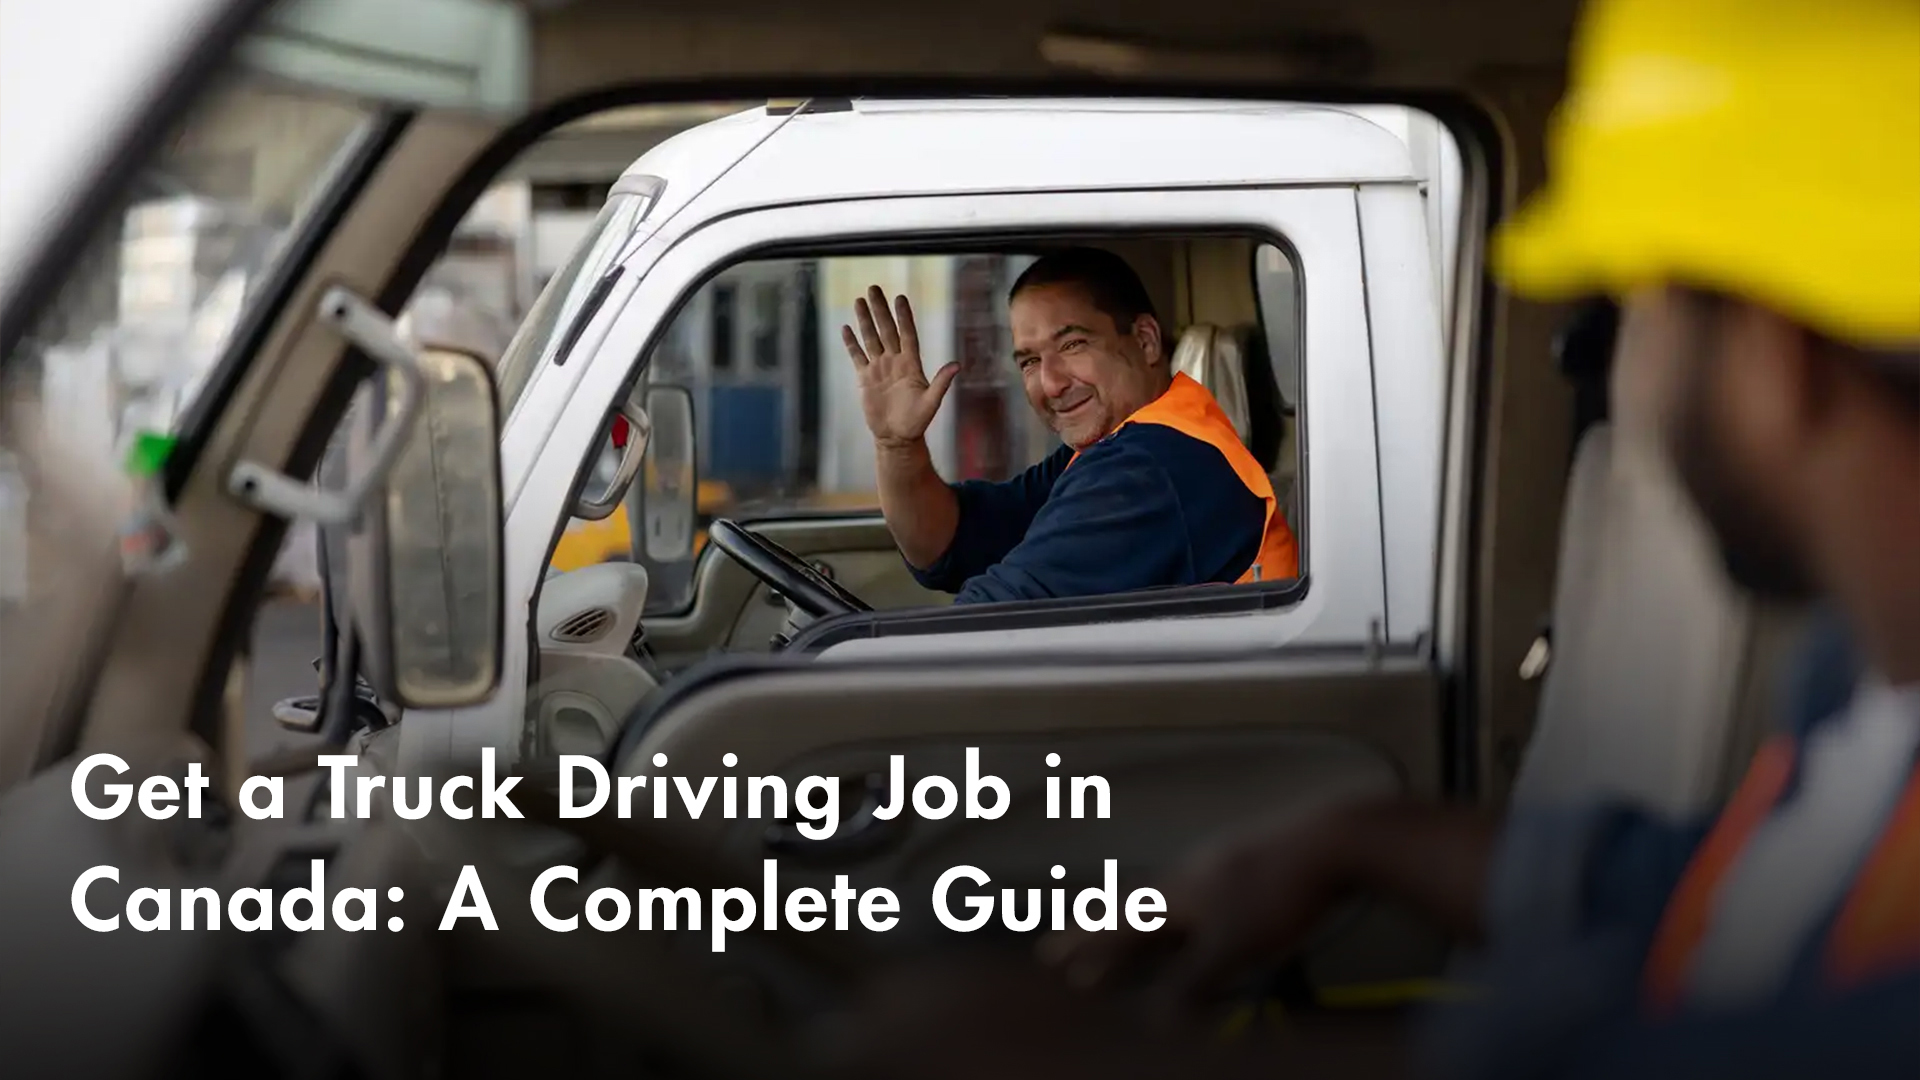 Get a Truck Driving Job in Canada: A Complete Guide